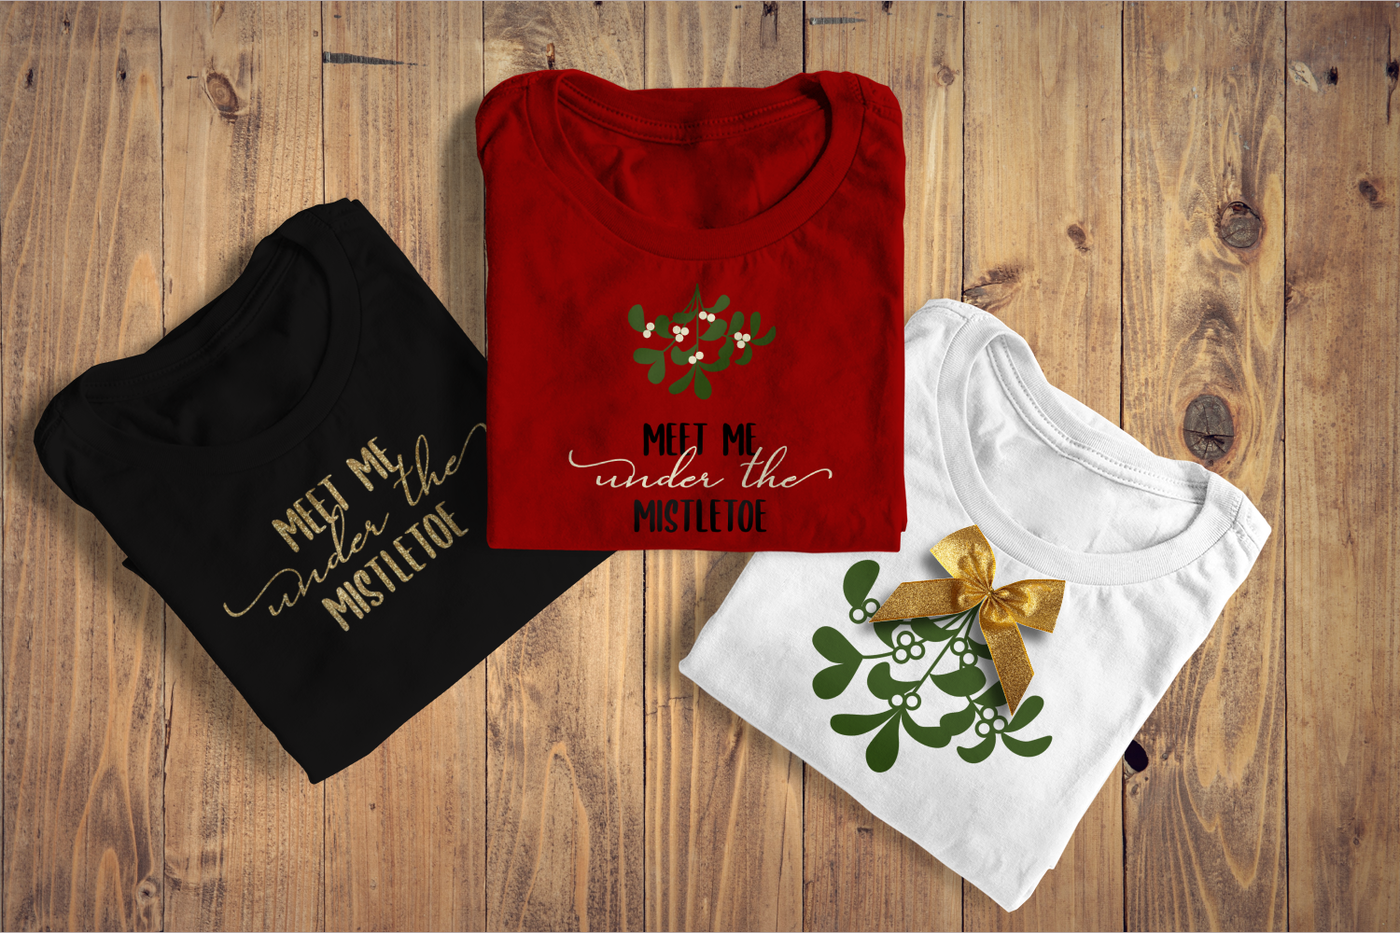 Three shirts. Two say "meet me under the mistletoe." One has a sprig of mistletoe over the text. The third shirt has only the mistletoe and has a real bow on top.